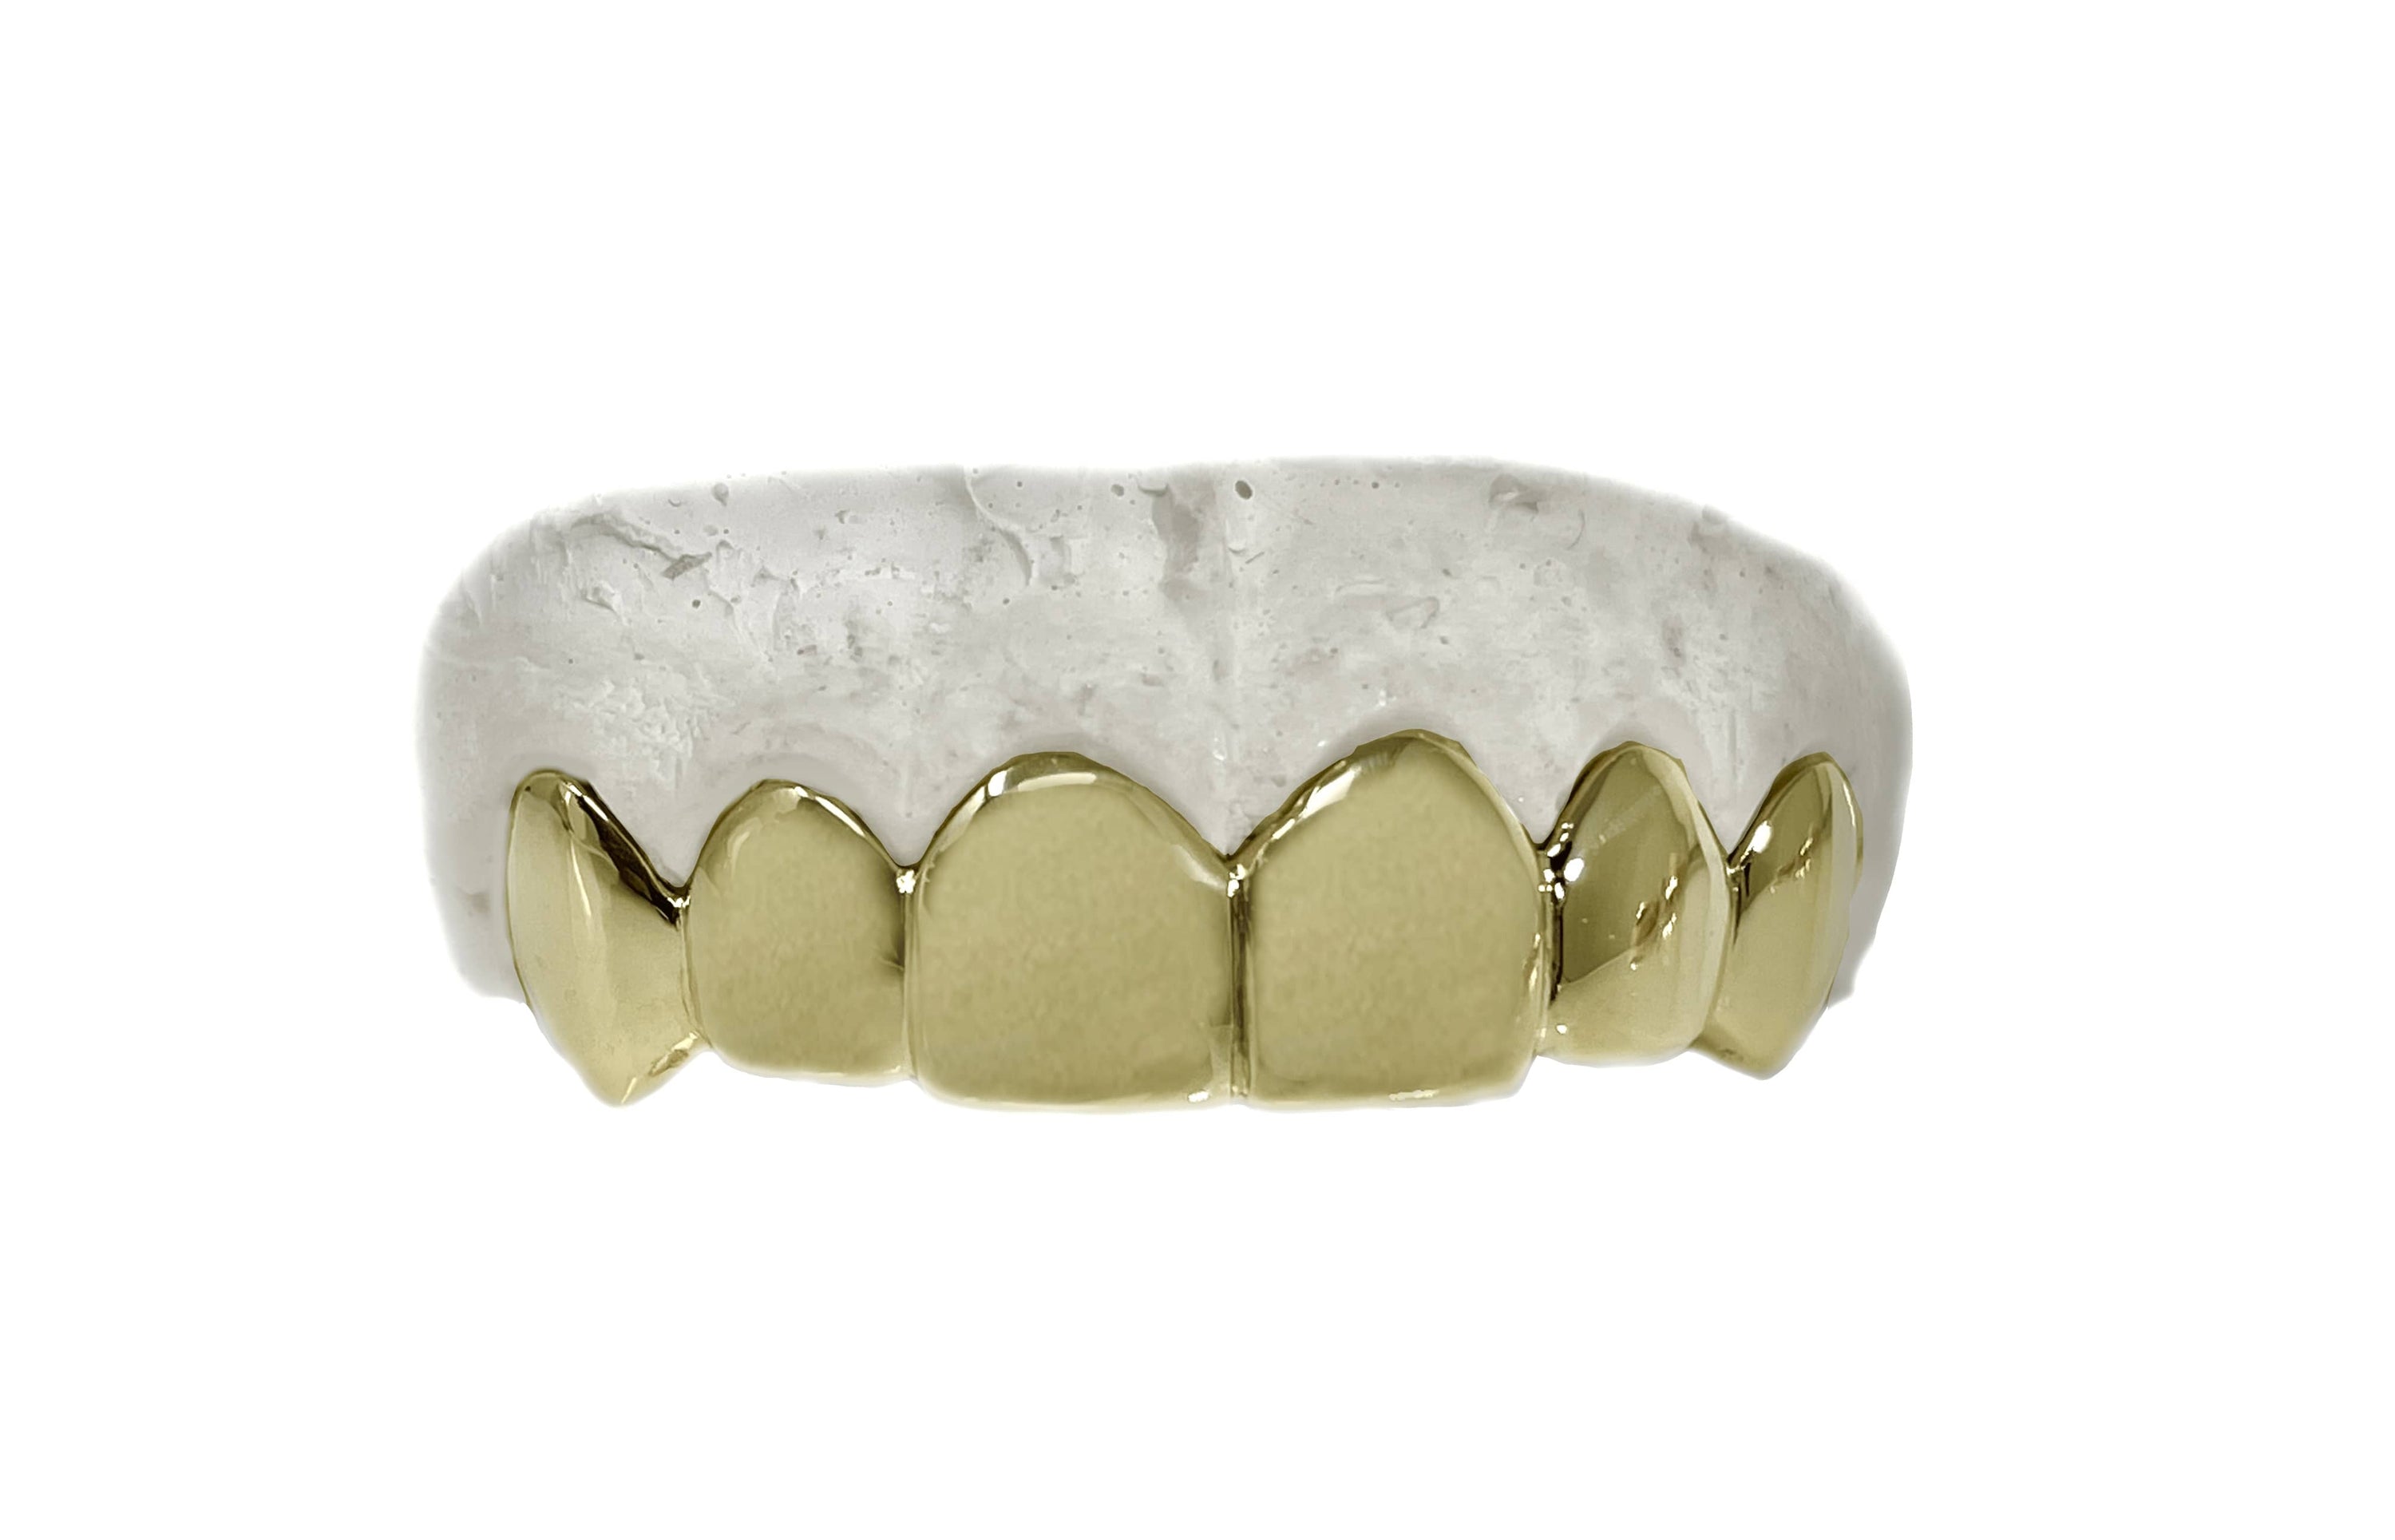 Javale McGee Grillz - Complete Guide on Cost and Designs